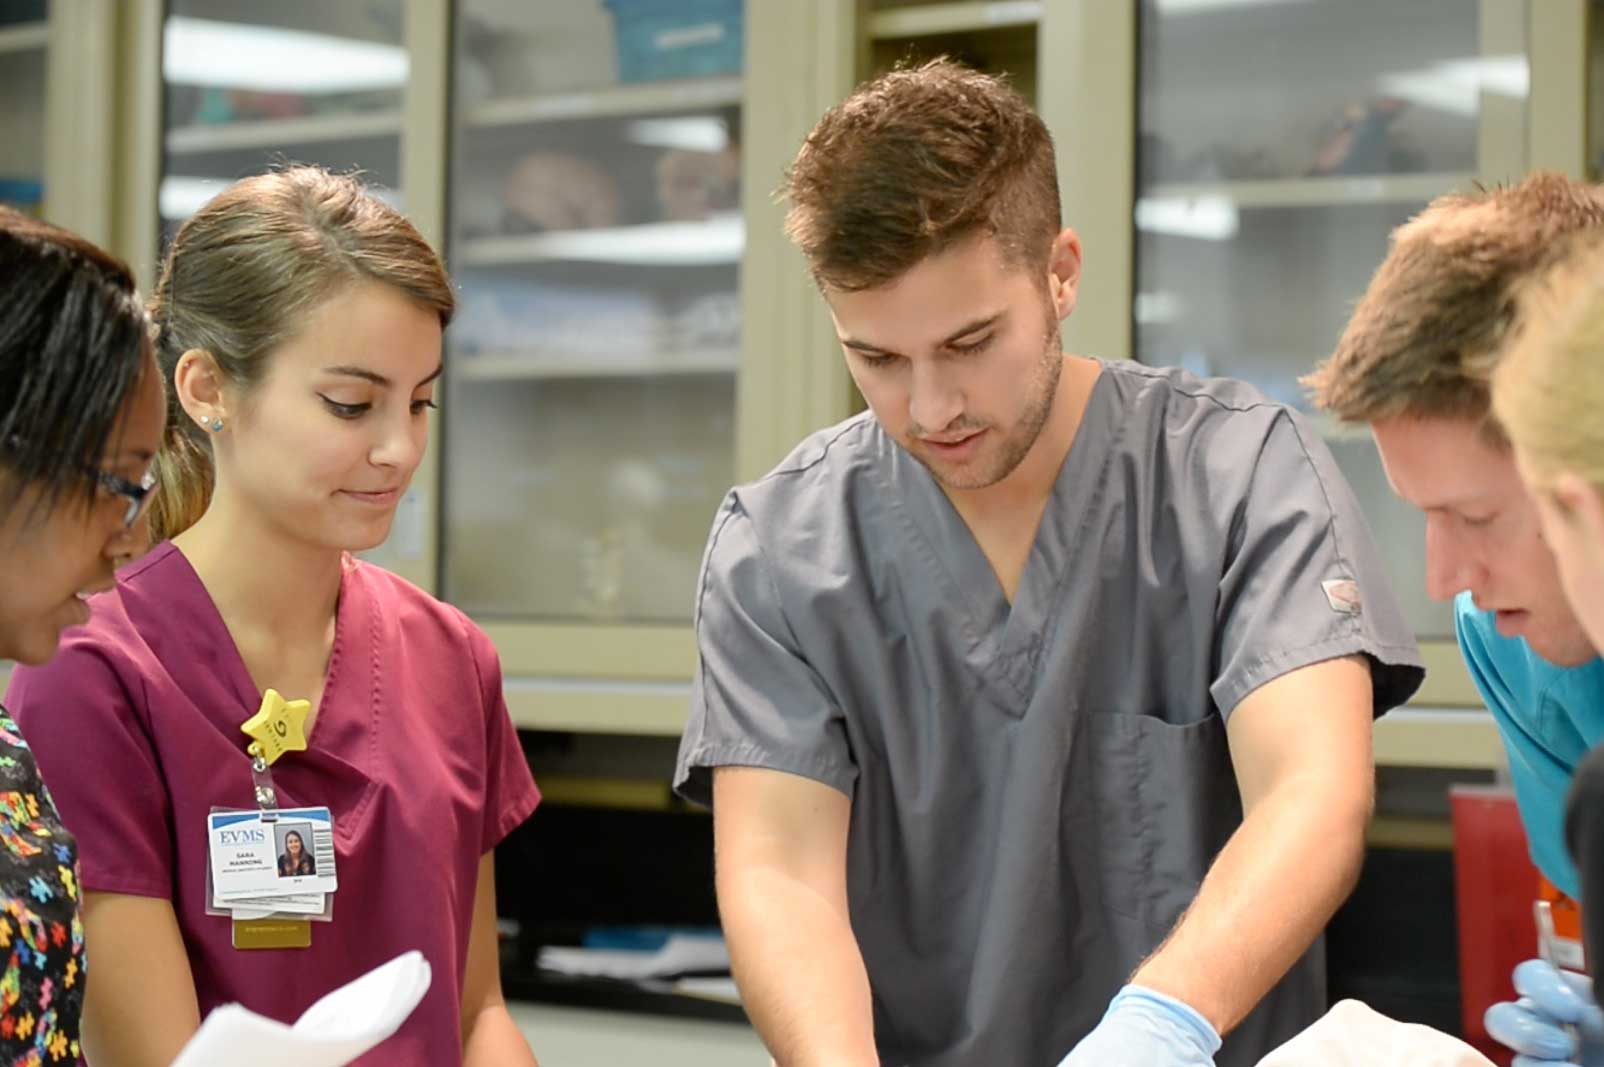 Medical Master's students hone their skills together in the lab.